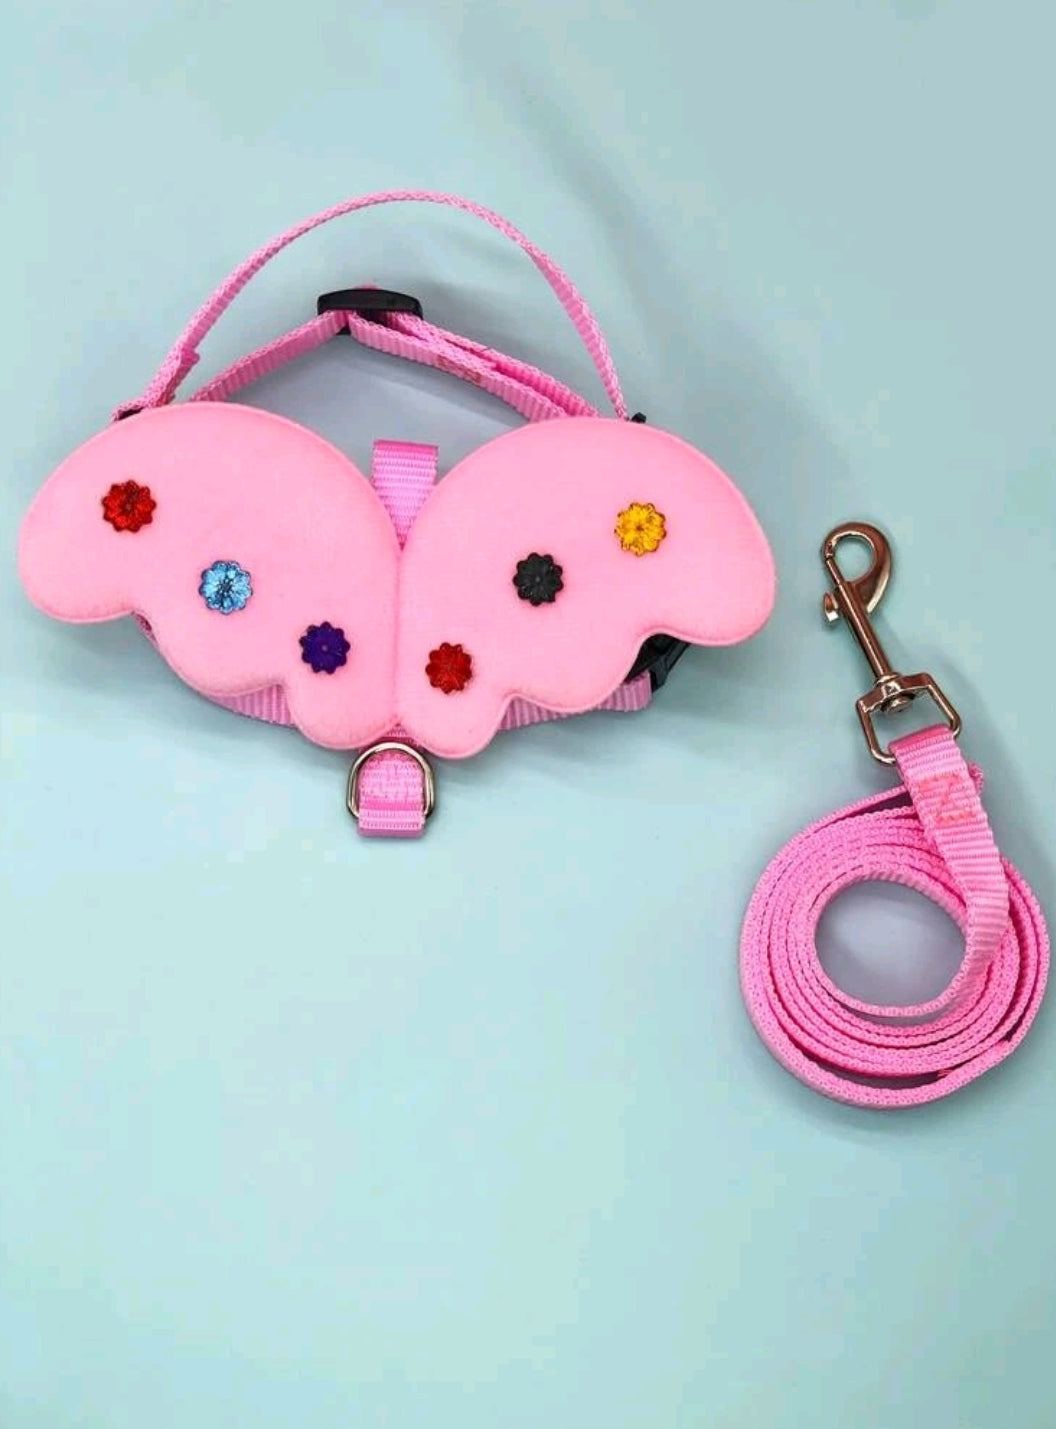 'Wing Decor Dog Harness & Leash' fun and soft colored pet harness with rainbow wings, for a superstar look! Color: Pink with rainbow glitter Material: Nylon Applicable Pet: Cat/Dog Size: - Length : 120 cm Width : 1.5 cm Bust : 30-48 cm Neck: 25-40 cm 